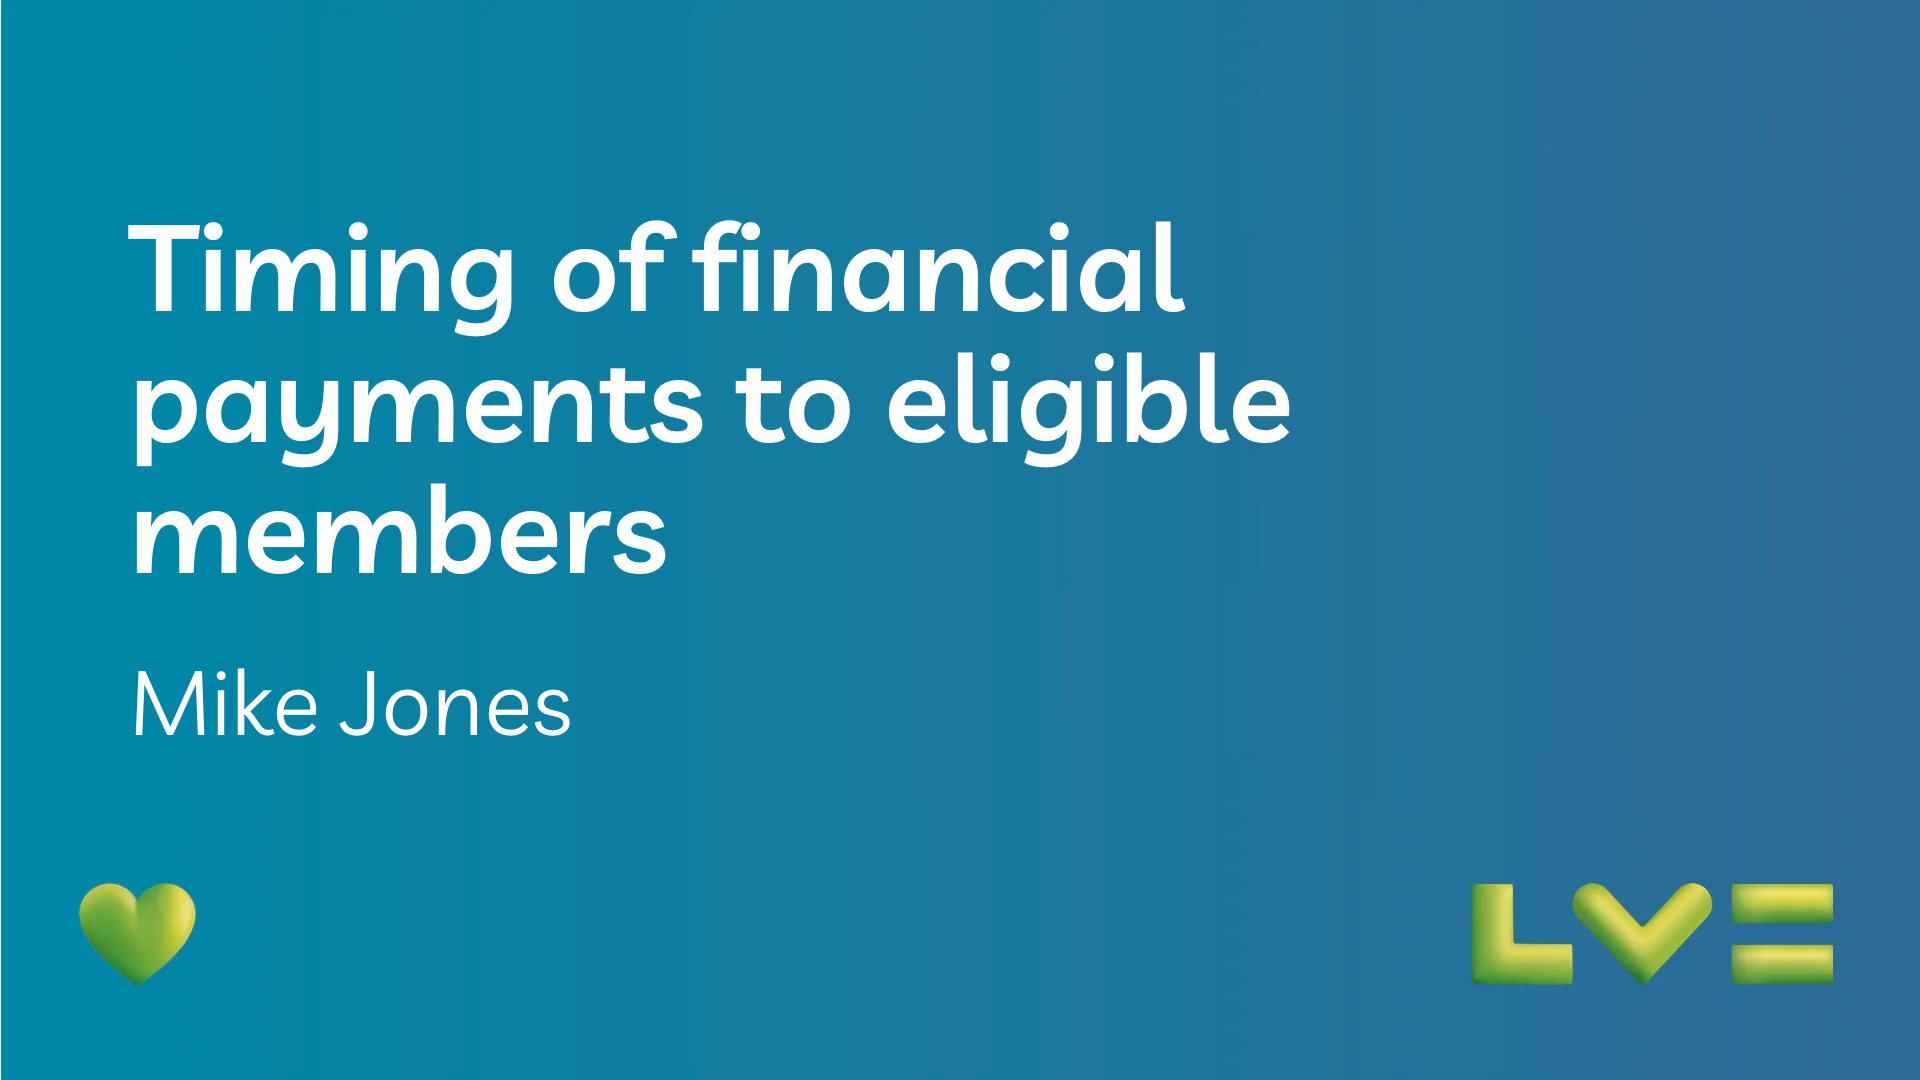 Timing of financial payments to eligible members